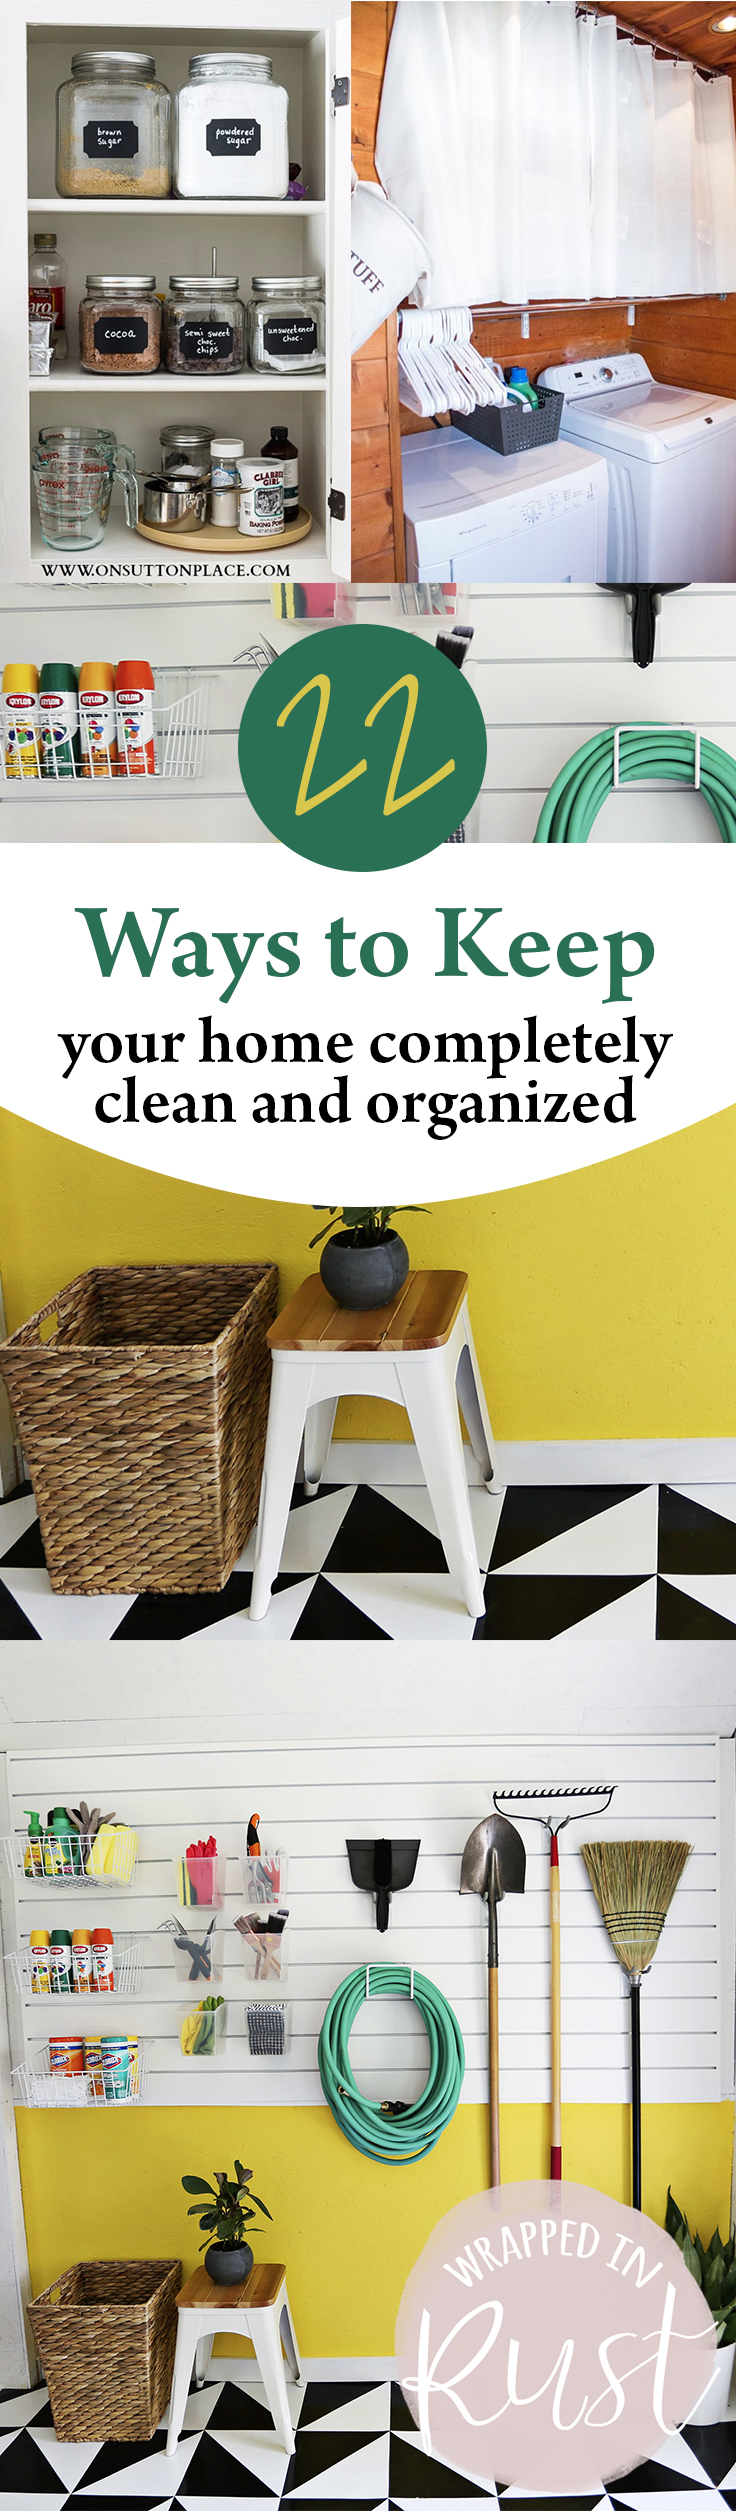 Clean Home, How to Easily Have a Clean Home, Home Cleaning, Home Cleaning Tricks, Home Cleaning TIps and Tricks, Home Organization, How to Organize Your Home, Easy Ways to Organize Your Home, Home Organization, Popular Pin